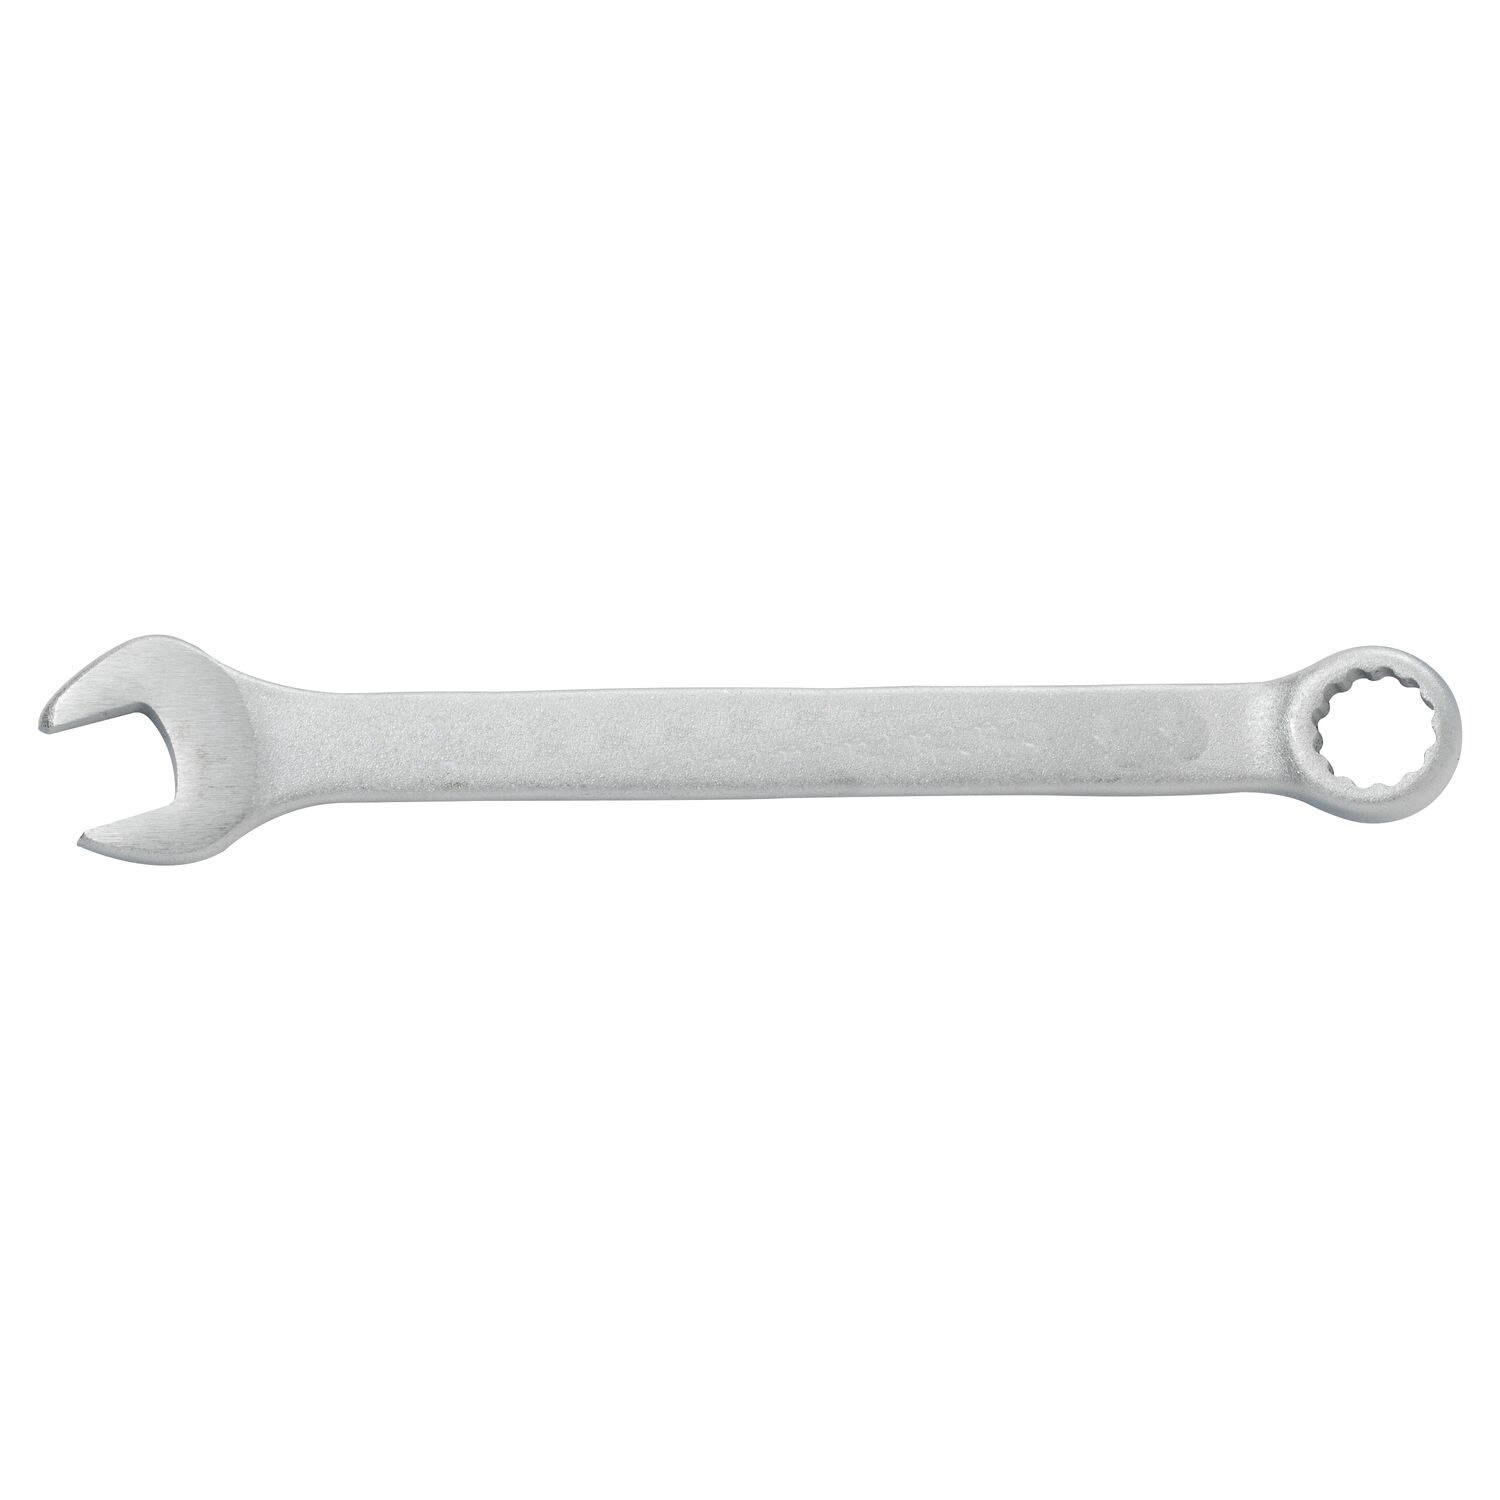 1-1/2 IN. 12 POINT COMBINATION WRENCH